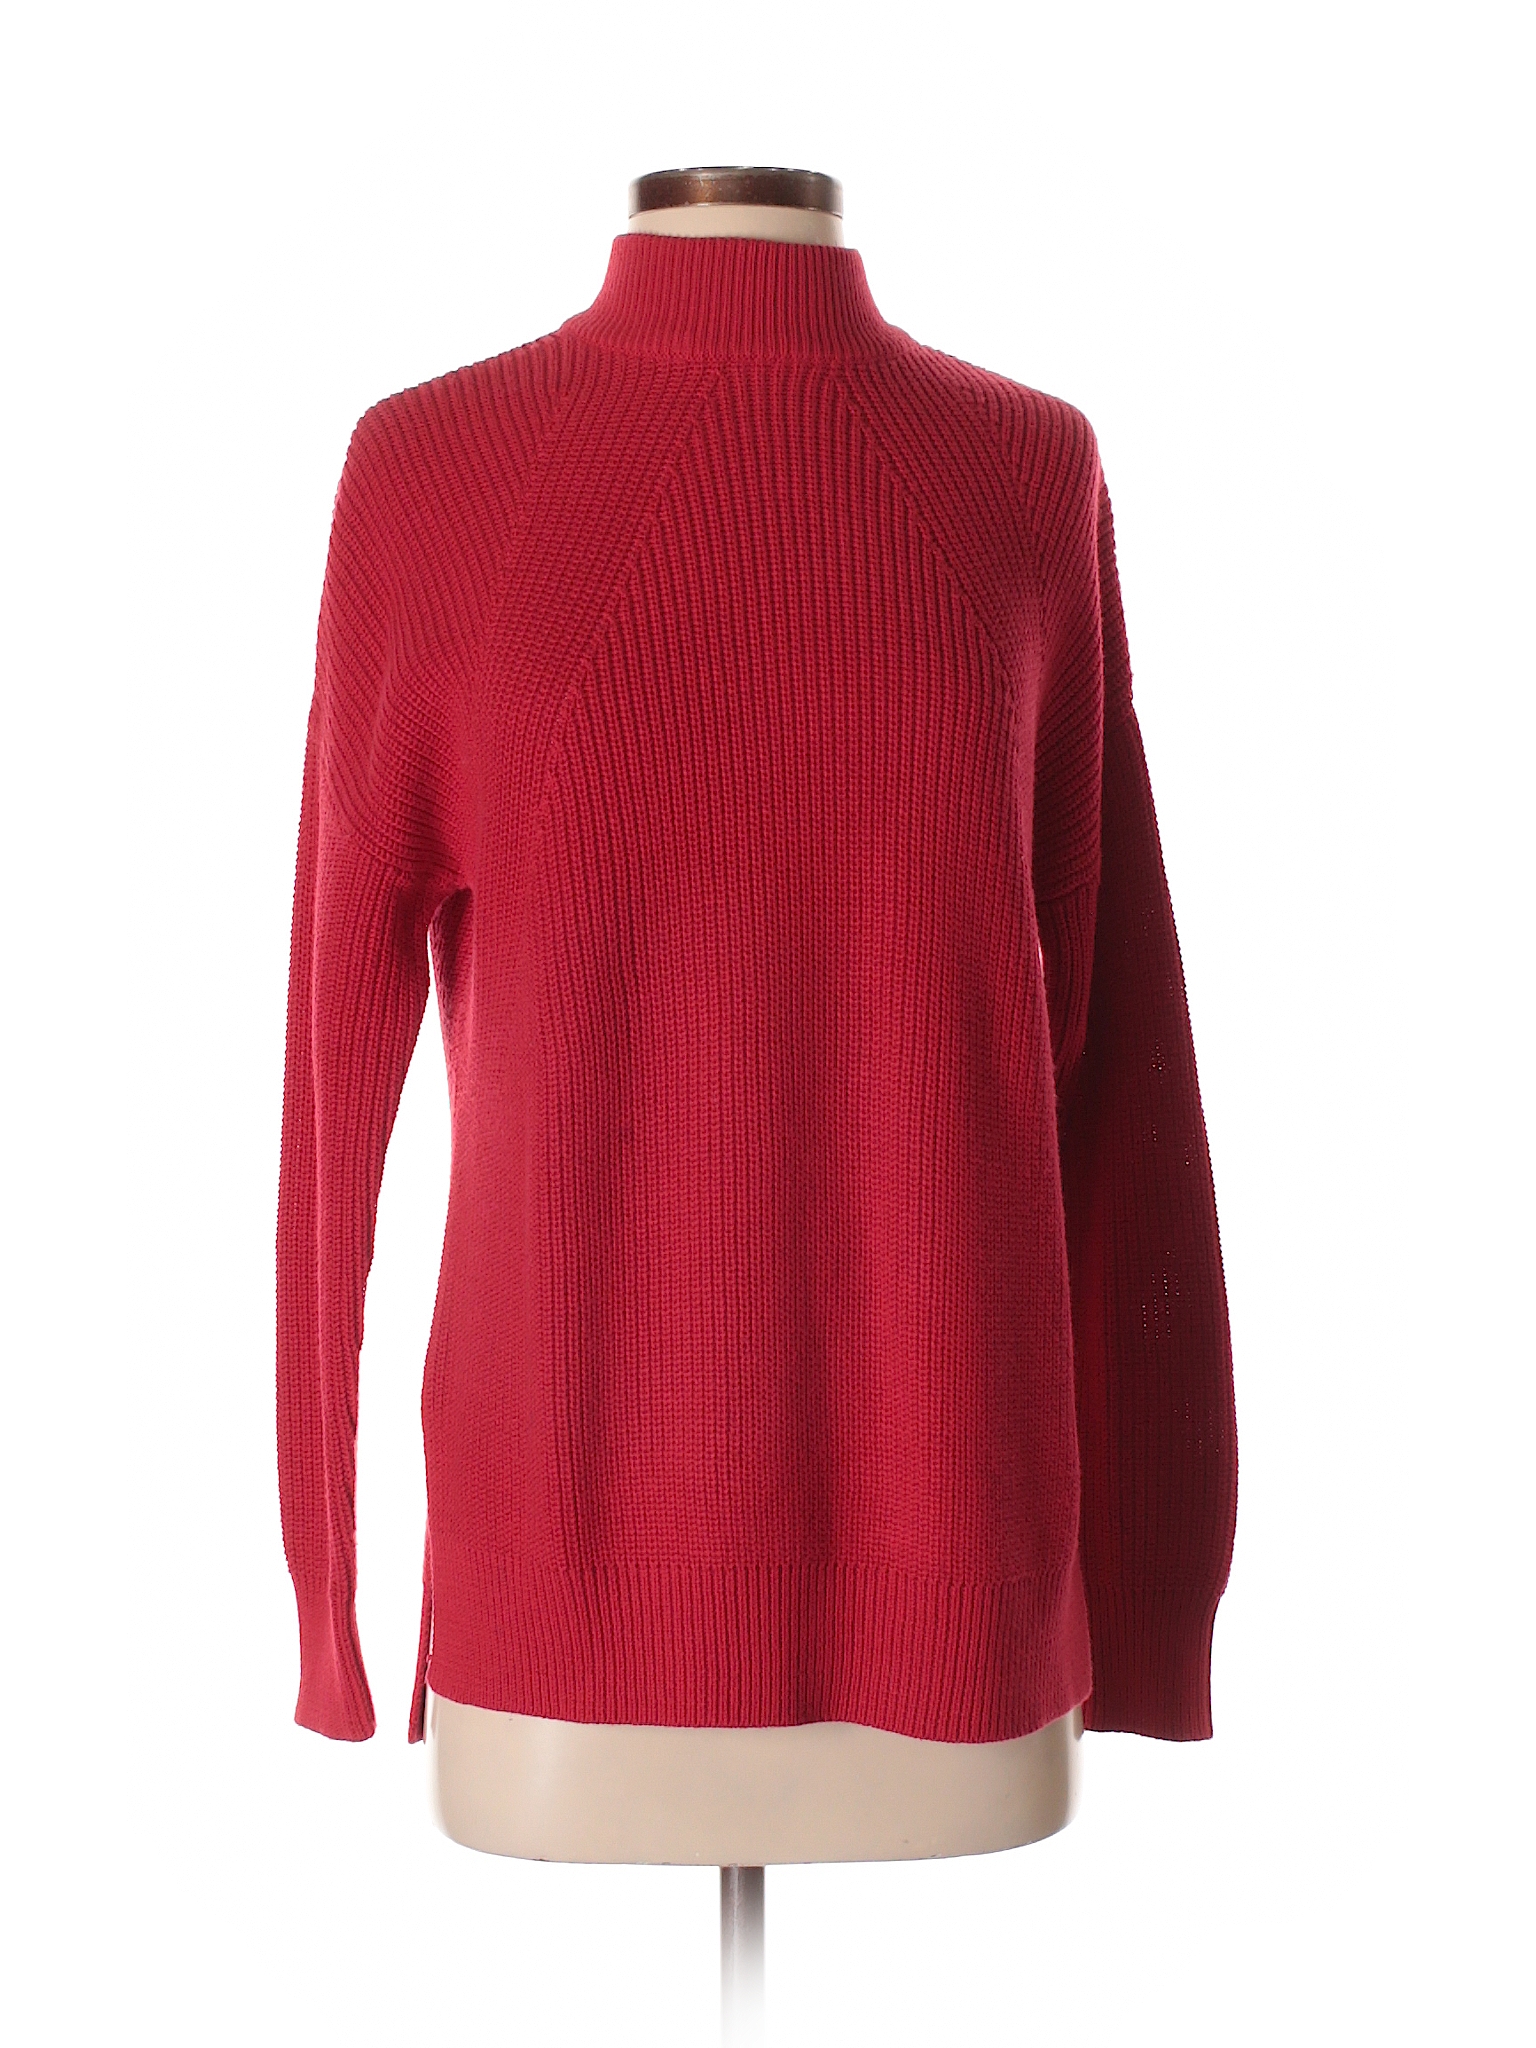 Divided by H&M Solid Red Turtleneck Sweater Size S - 70% off | thredUP